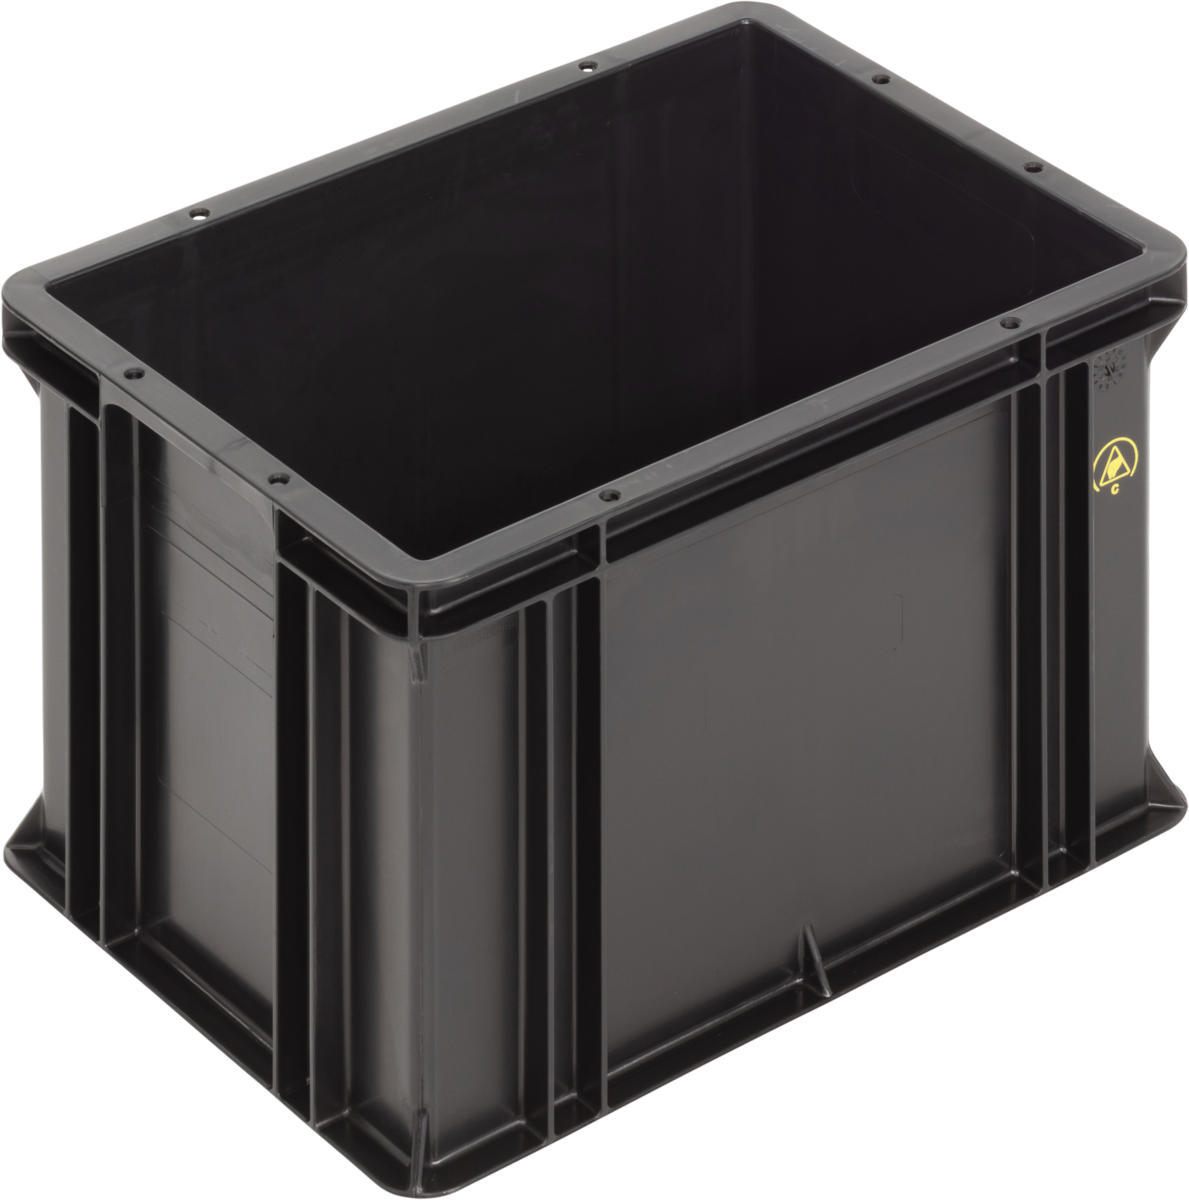 ESD-Safe-SGL-Norm-Stacking-Bin-Containers-Flat-Base-Ref.-4326.007.992_1004402_400x300x278_01